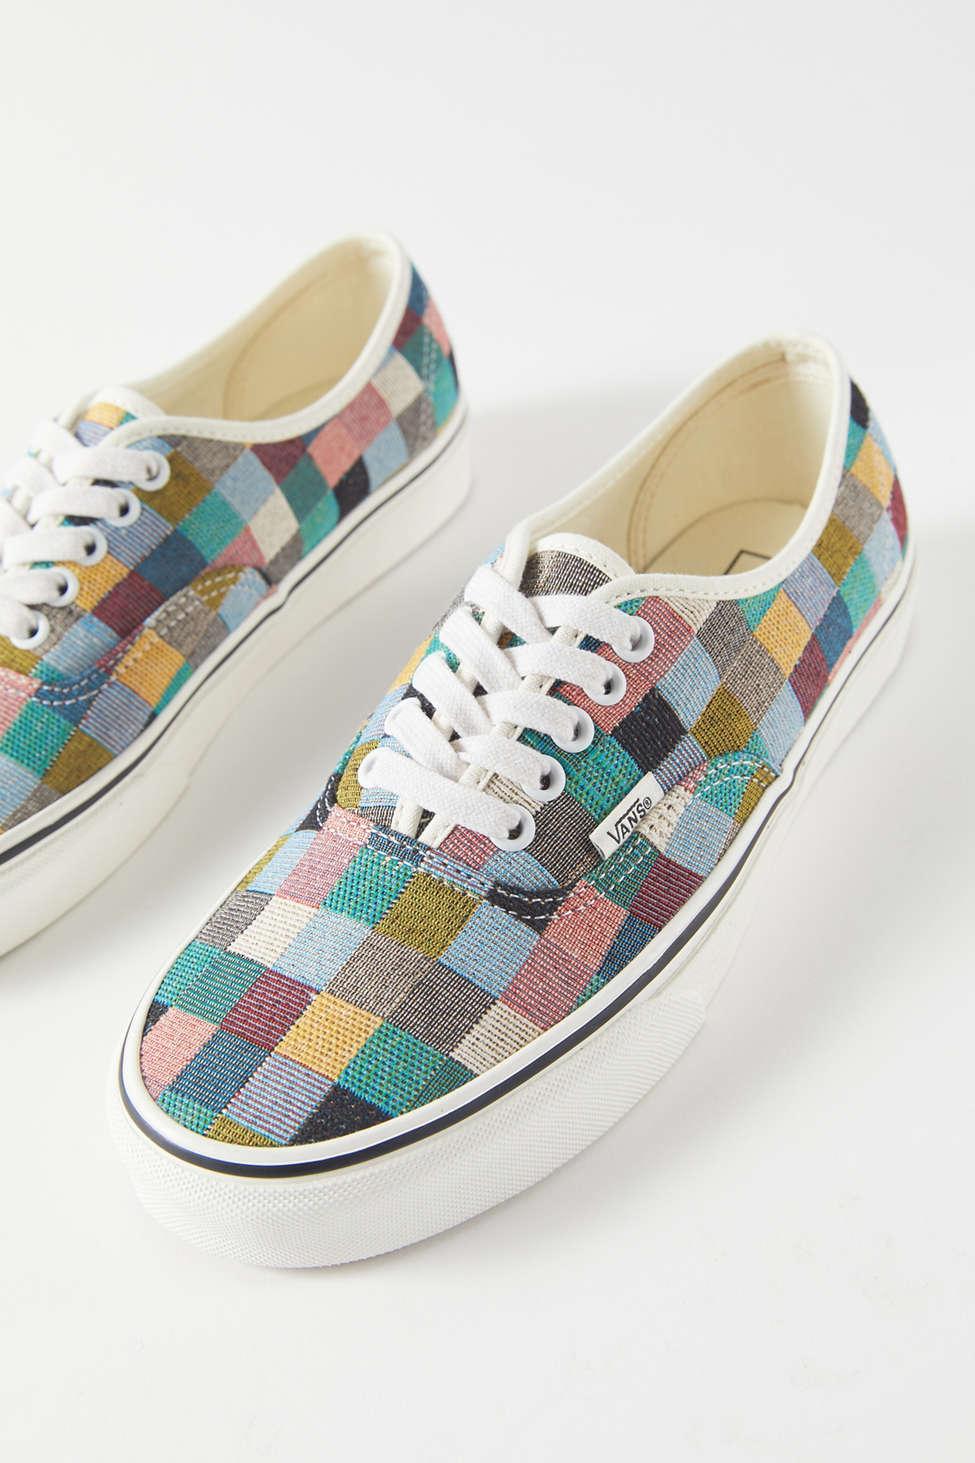 Vans Rubber Uo Authentic Checkerboard Sneaker in Blue - Lyst